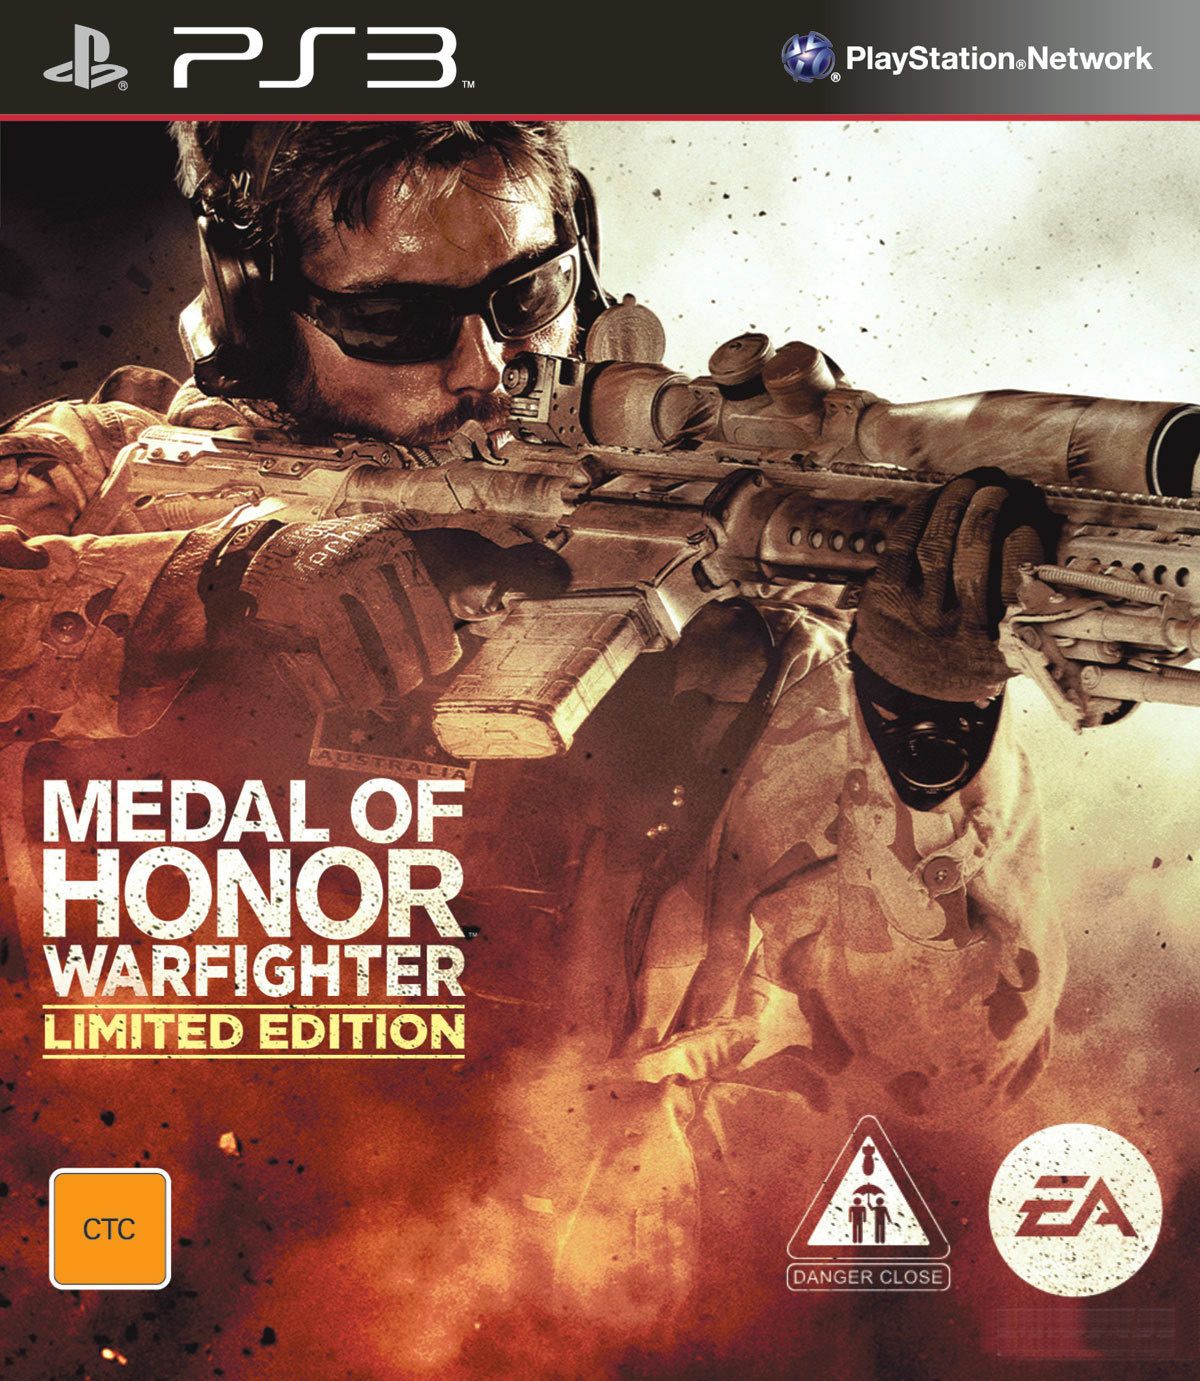 Medal of honor 3. Ps3 Rus обложка Medal of Honor Warfighter. Medal of Honor ps3 обложка. Игра Medal of Honor на PLAYSTATION 3. Medal of Honor: Warfighter [ps3, русская версия].